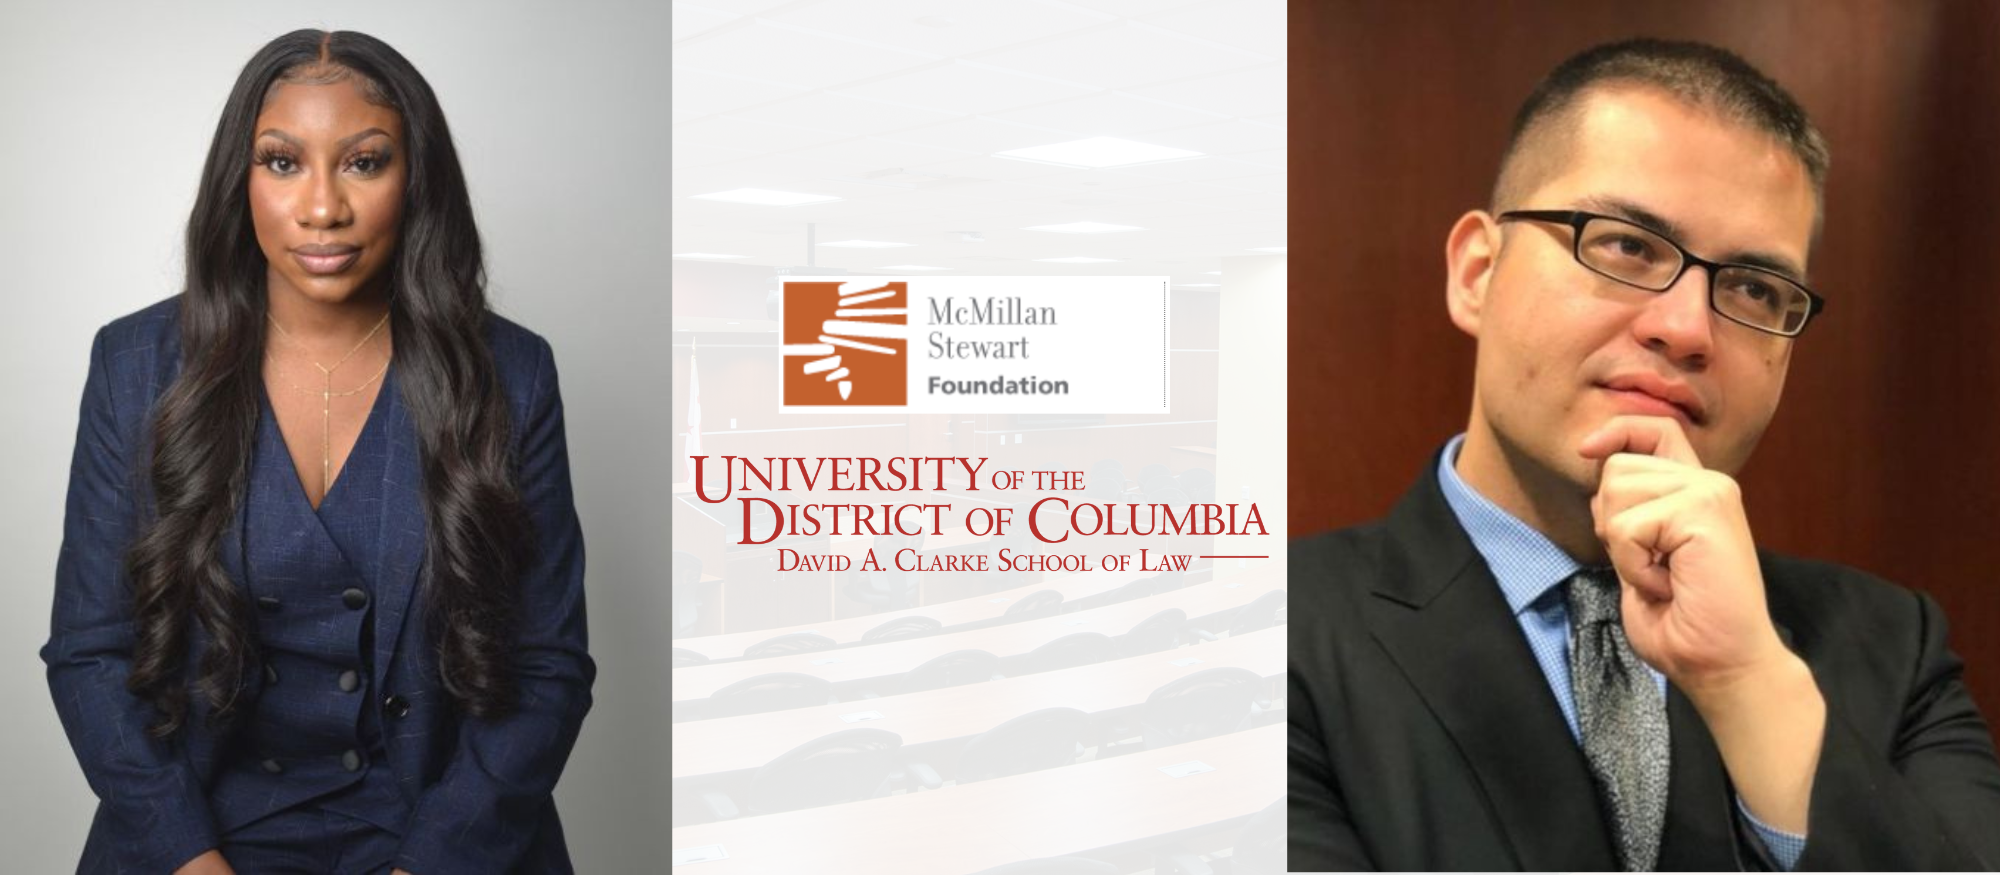 The DC School of Law Foundation and the UDC Foundation Benefit from Two McMillan Stewart Access Scholarship Endowments